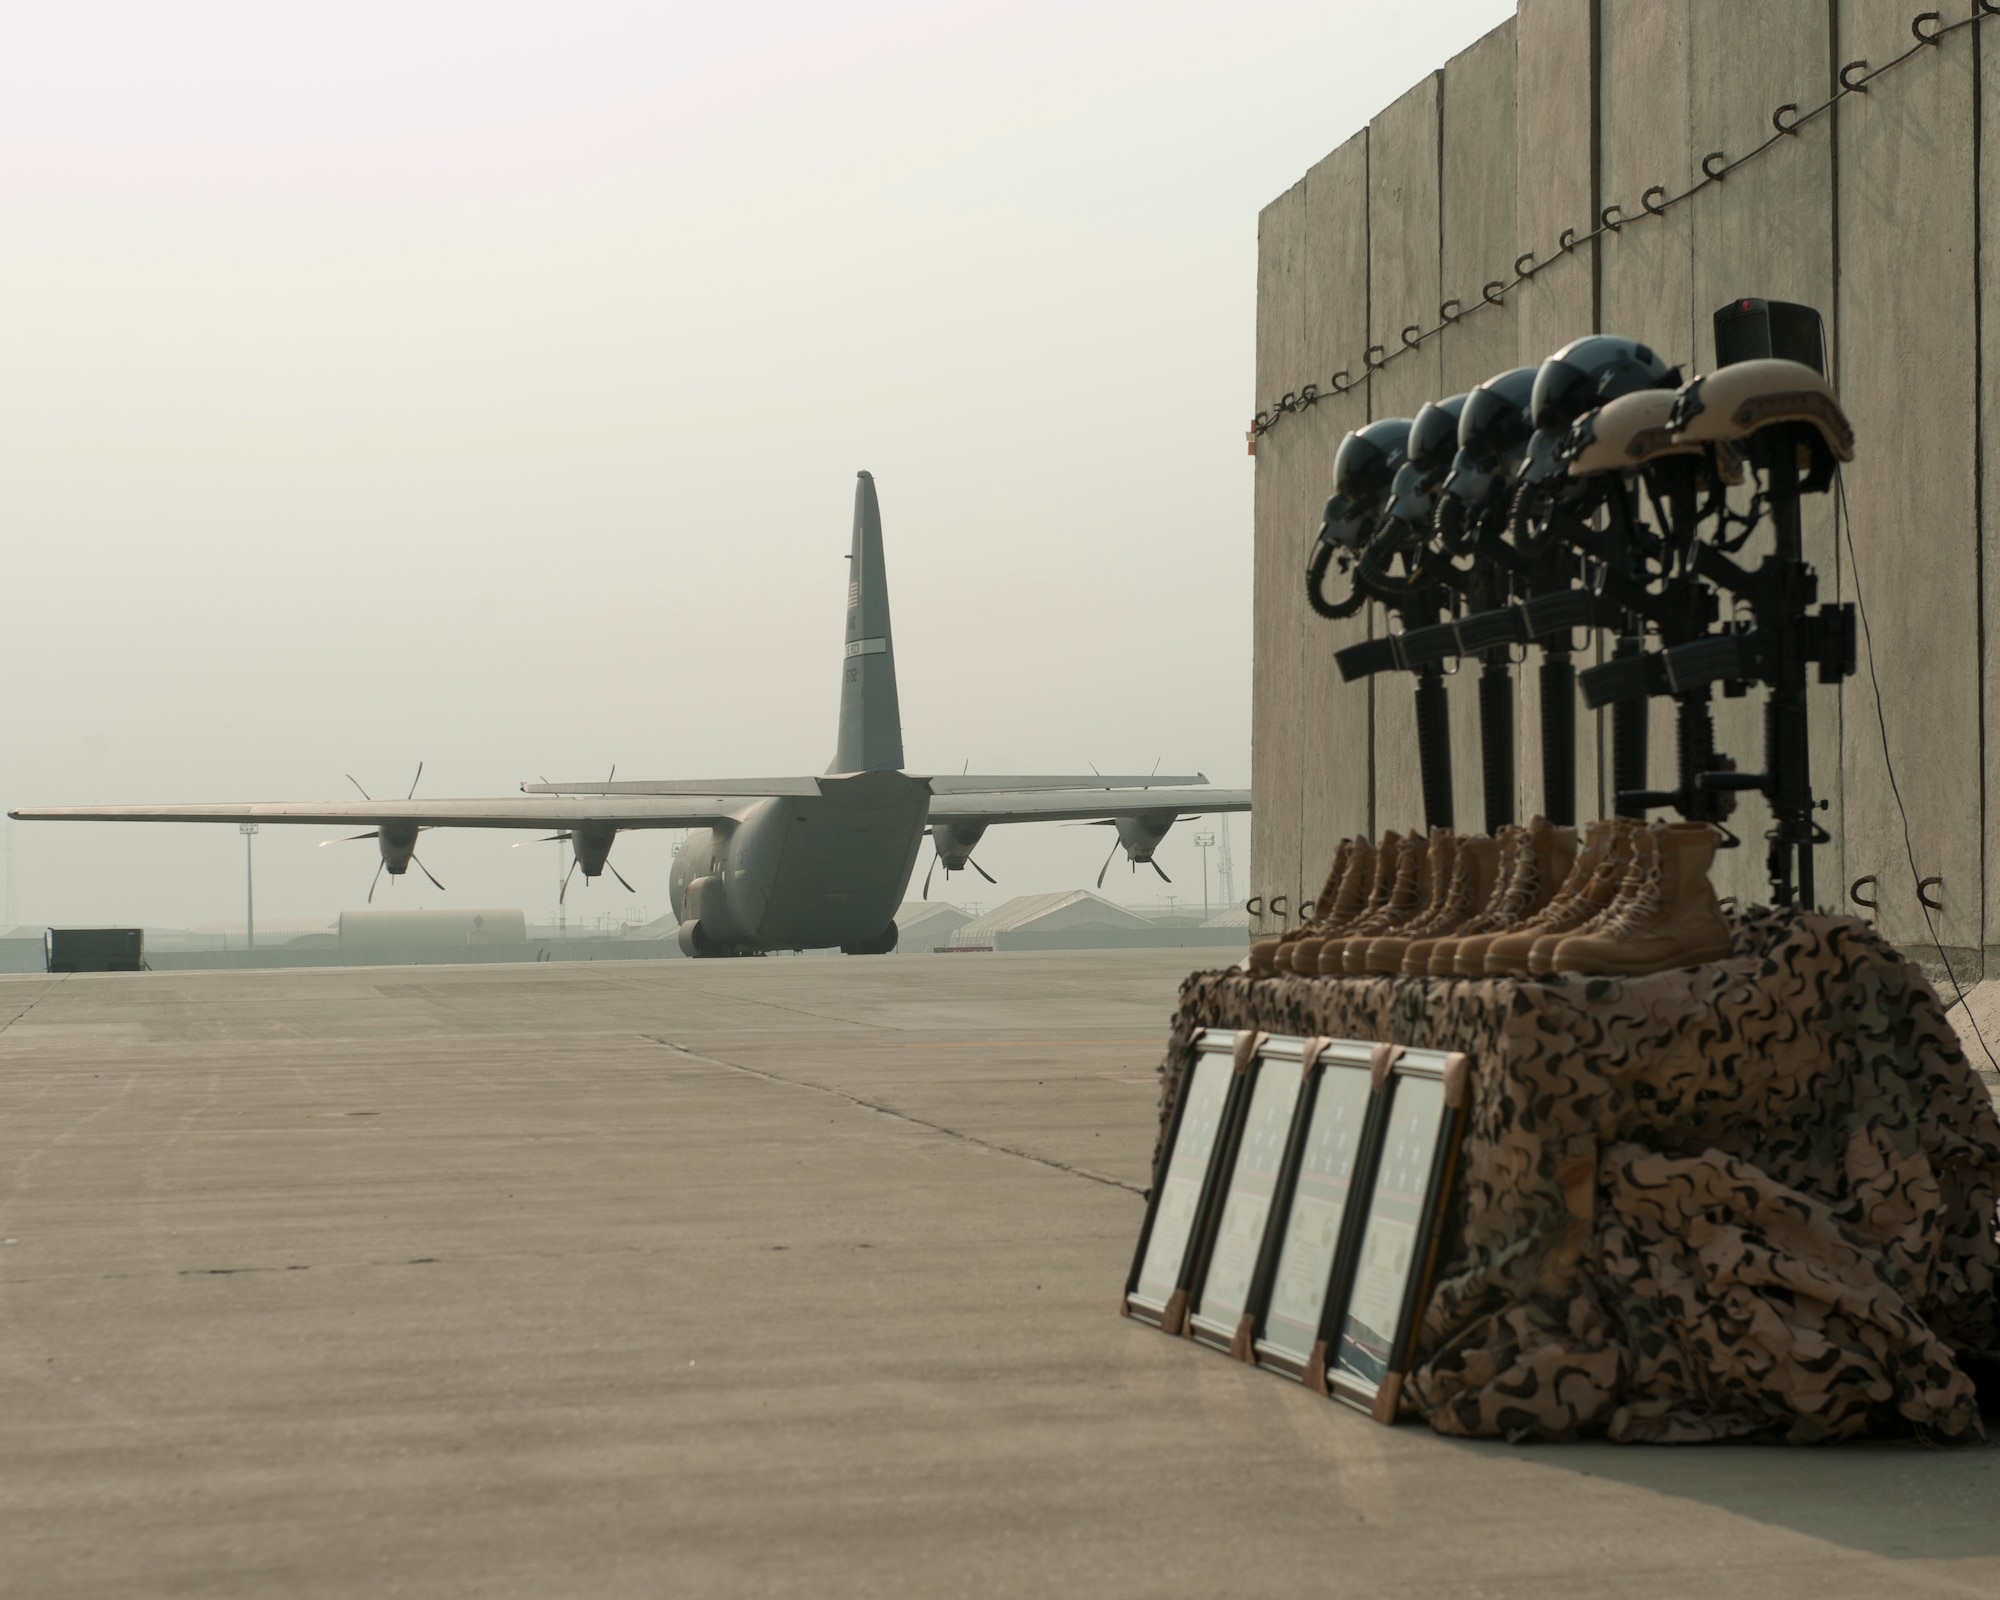 Battlefield crosses were placed in honor of the six Airmen lost when TORQE 62 crashed one year ago during a remembrance ceremony, Bagram Airfield, Afghanistan, Oct. 2, 2016. Airmen from across Bagram came to honor those who paid the ultimate sacrifice. (U.S. Air Force photo by Capt. Korey Fratini)